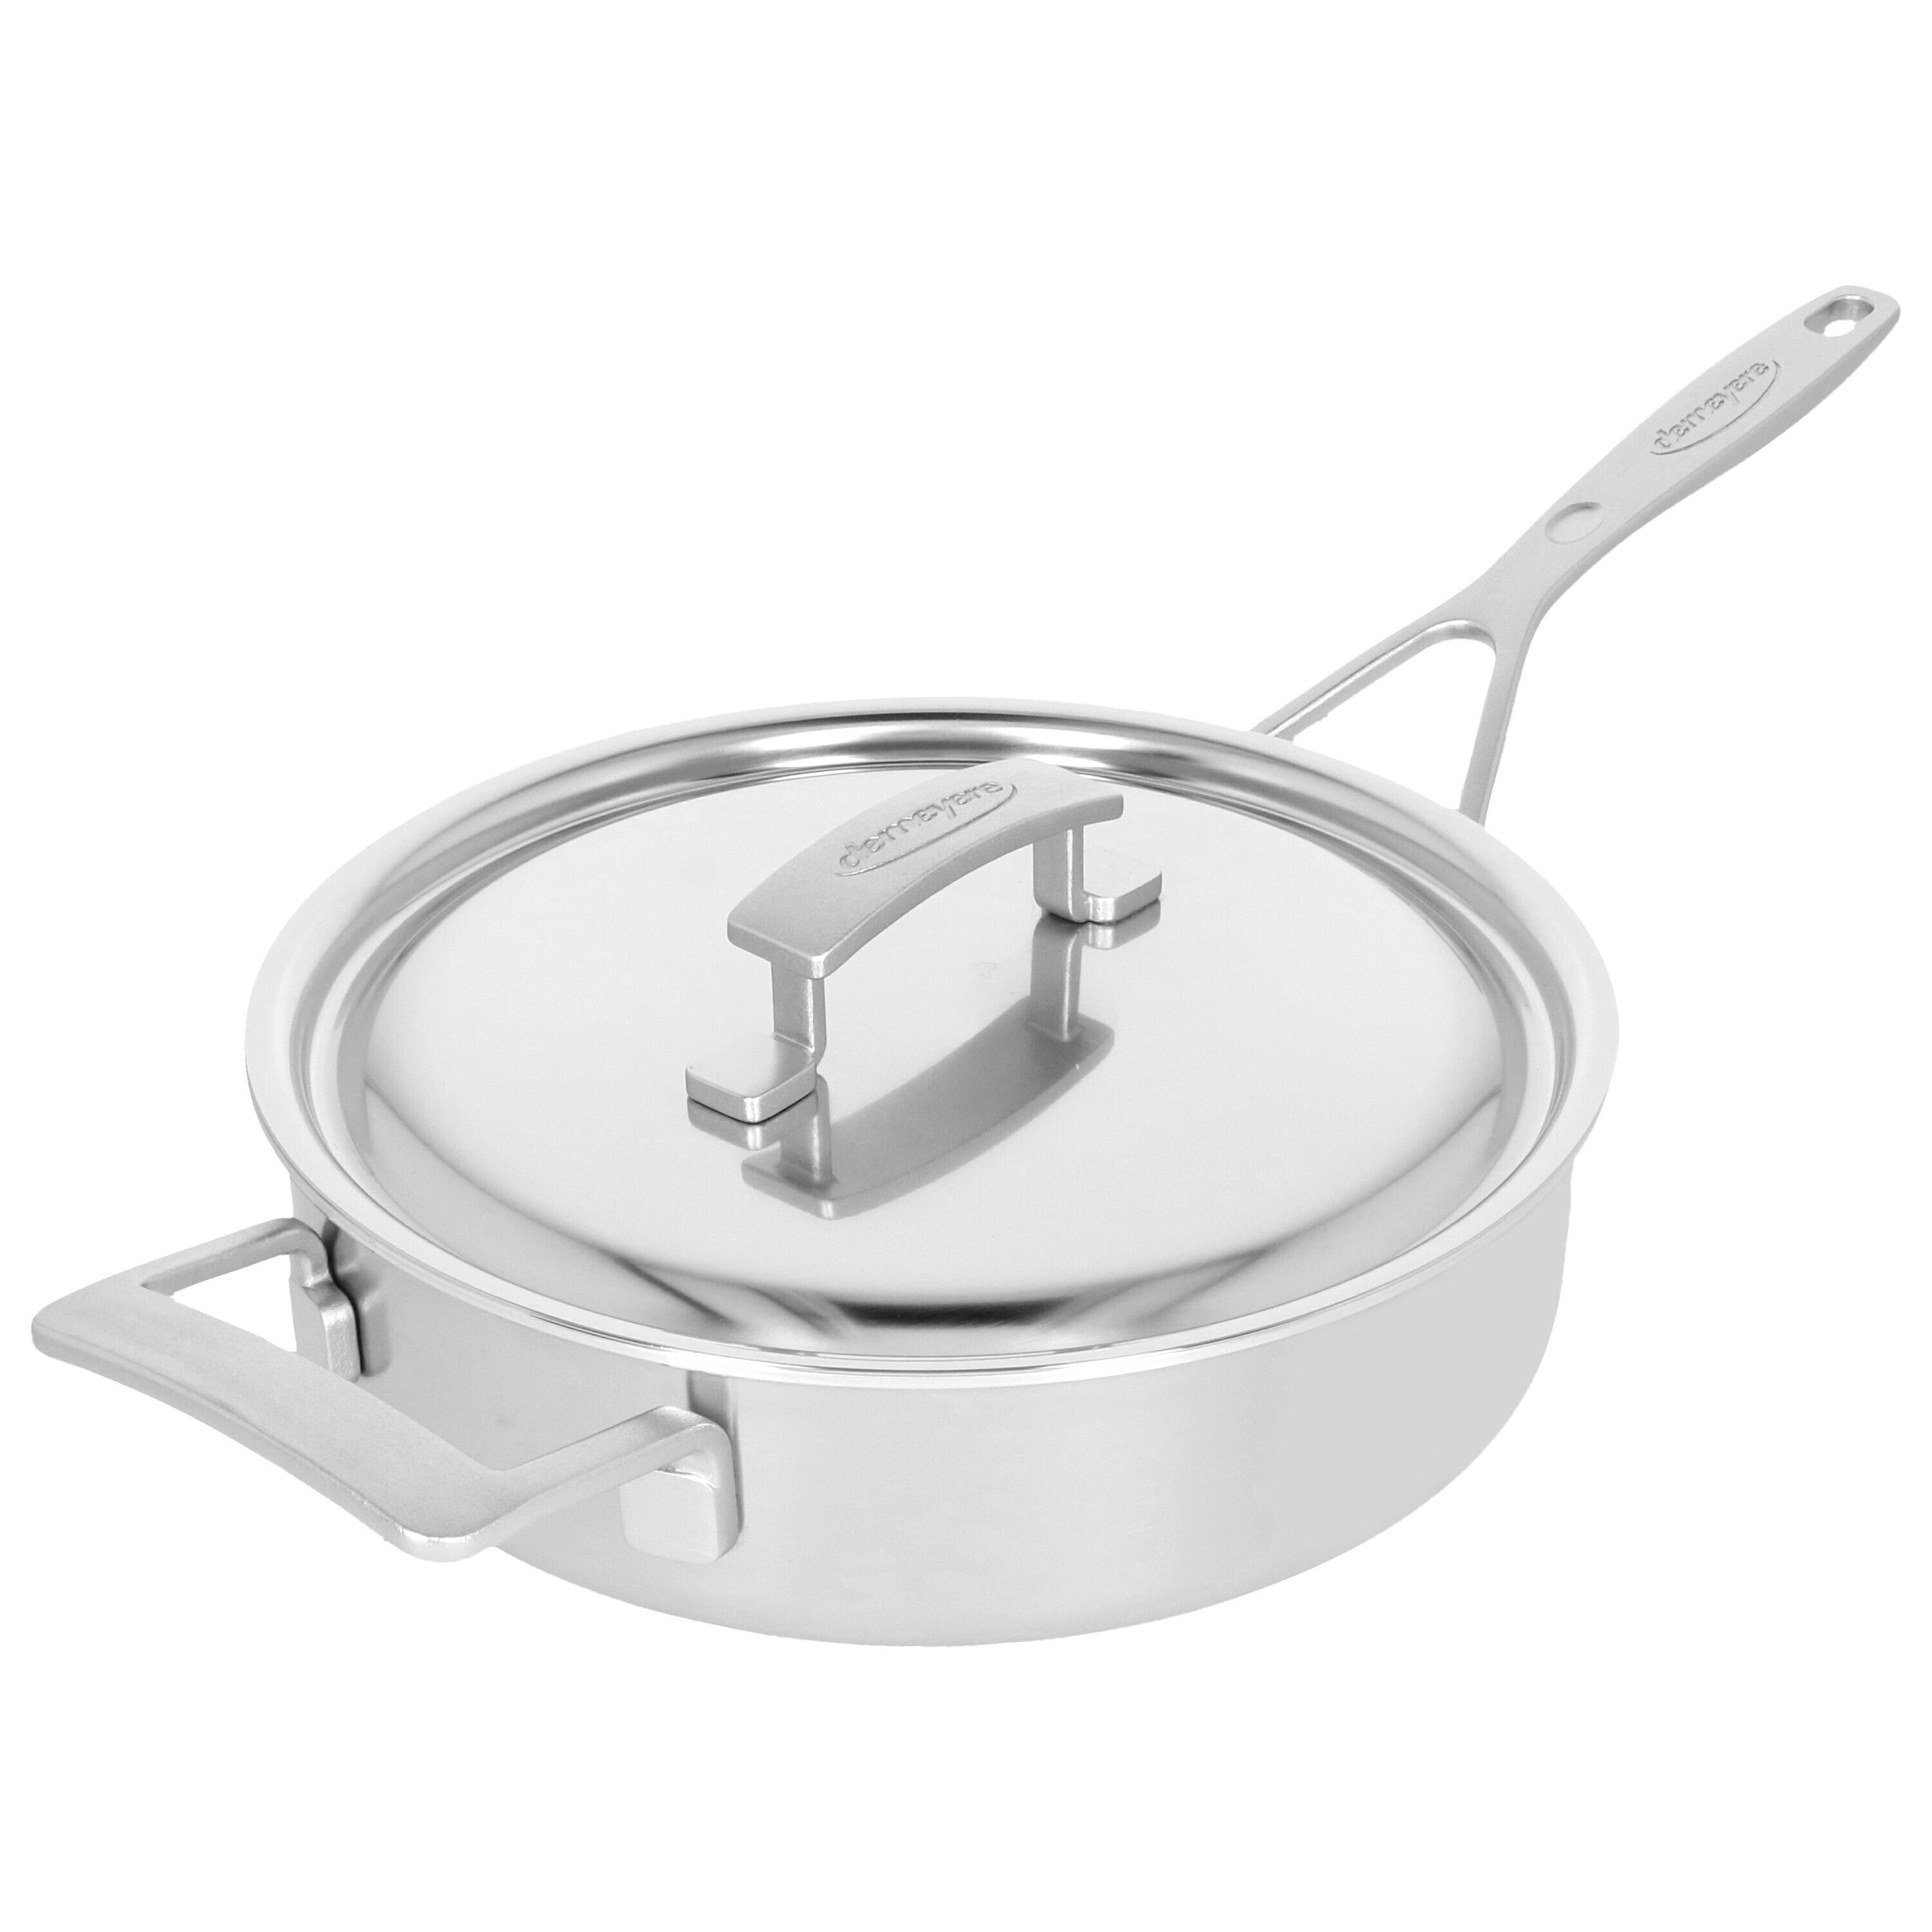 Cuisinart MultiClad Pro 8.86-in Stainless Steel Skillet in the